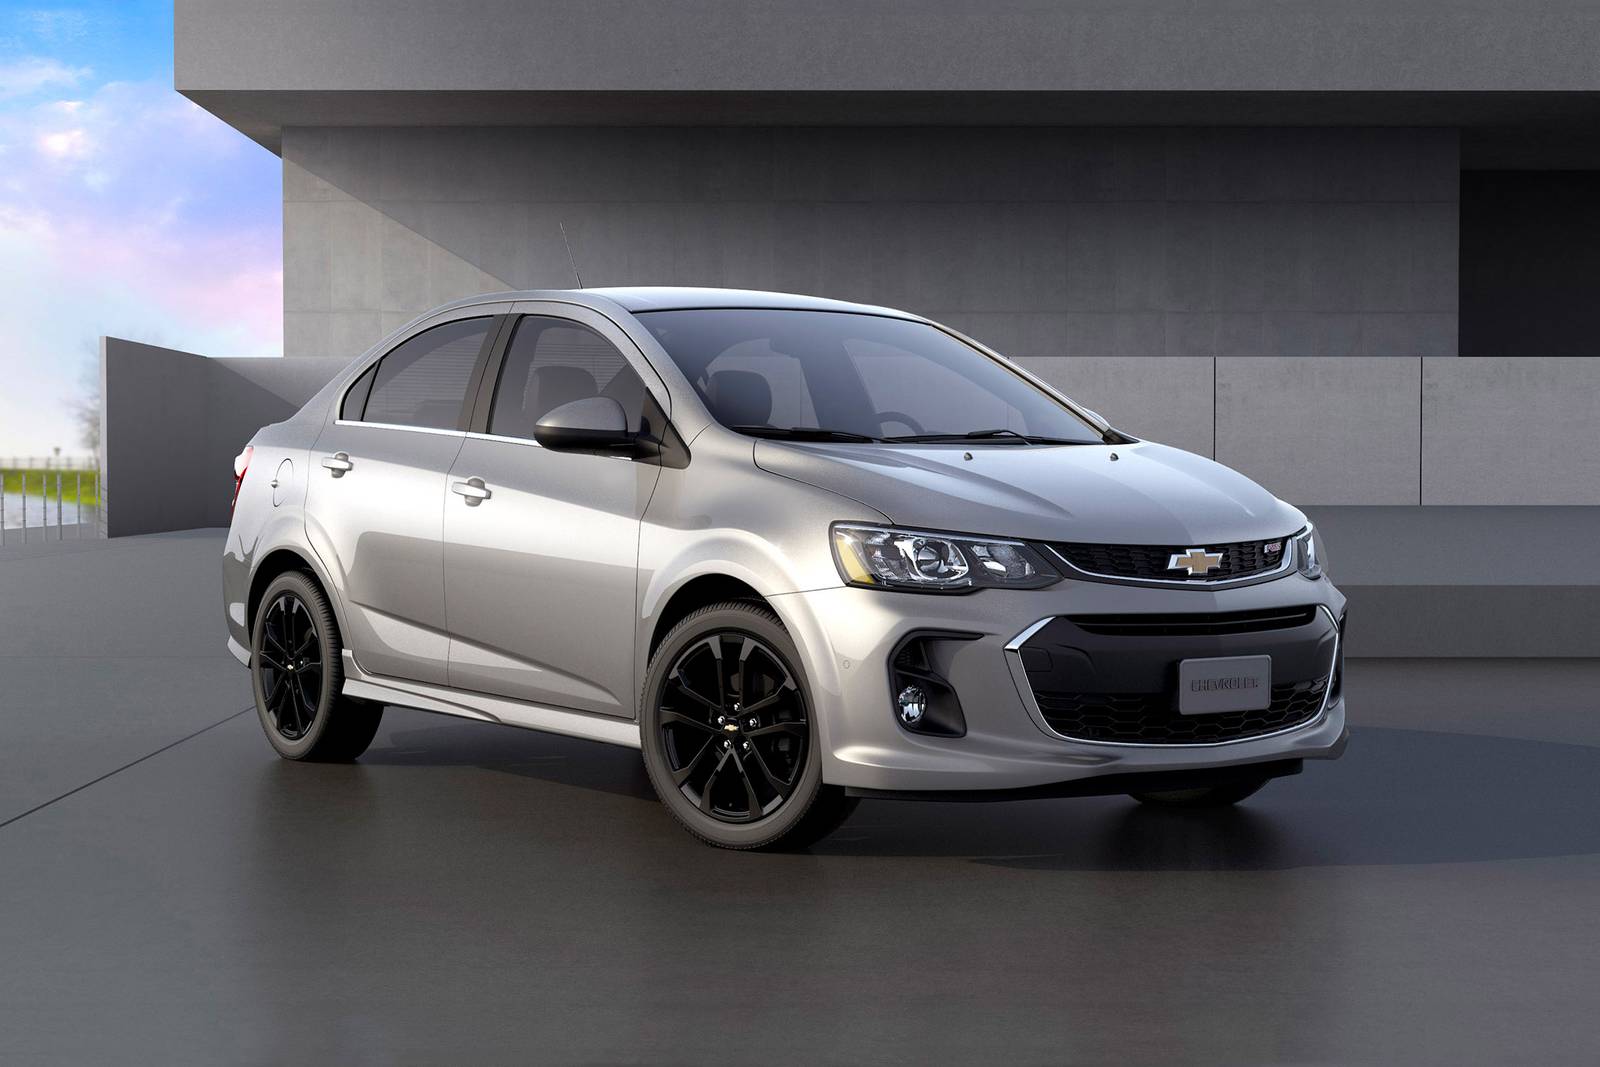 2019 Chevy Sonic Review & Ratings | Edmunds